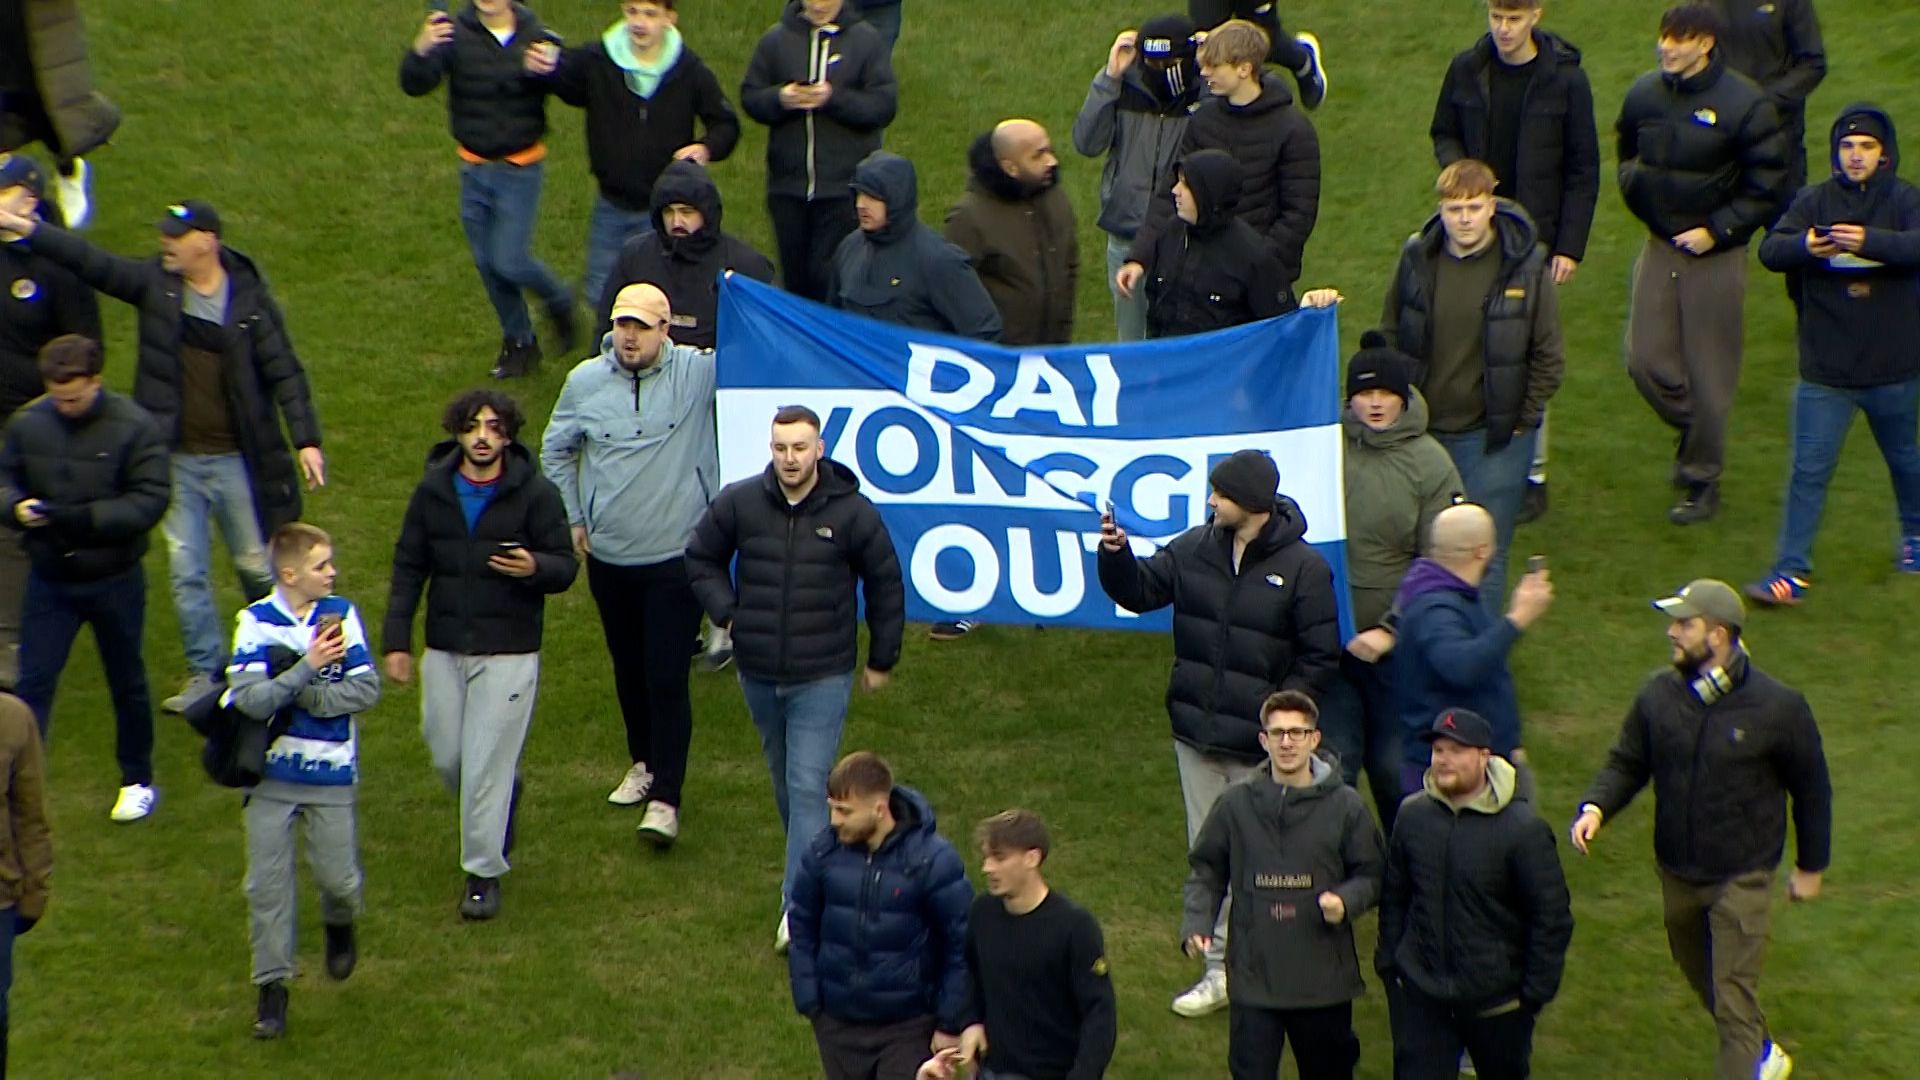 Explained: Why Reading fans are protesting against owner